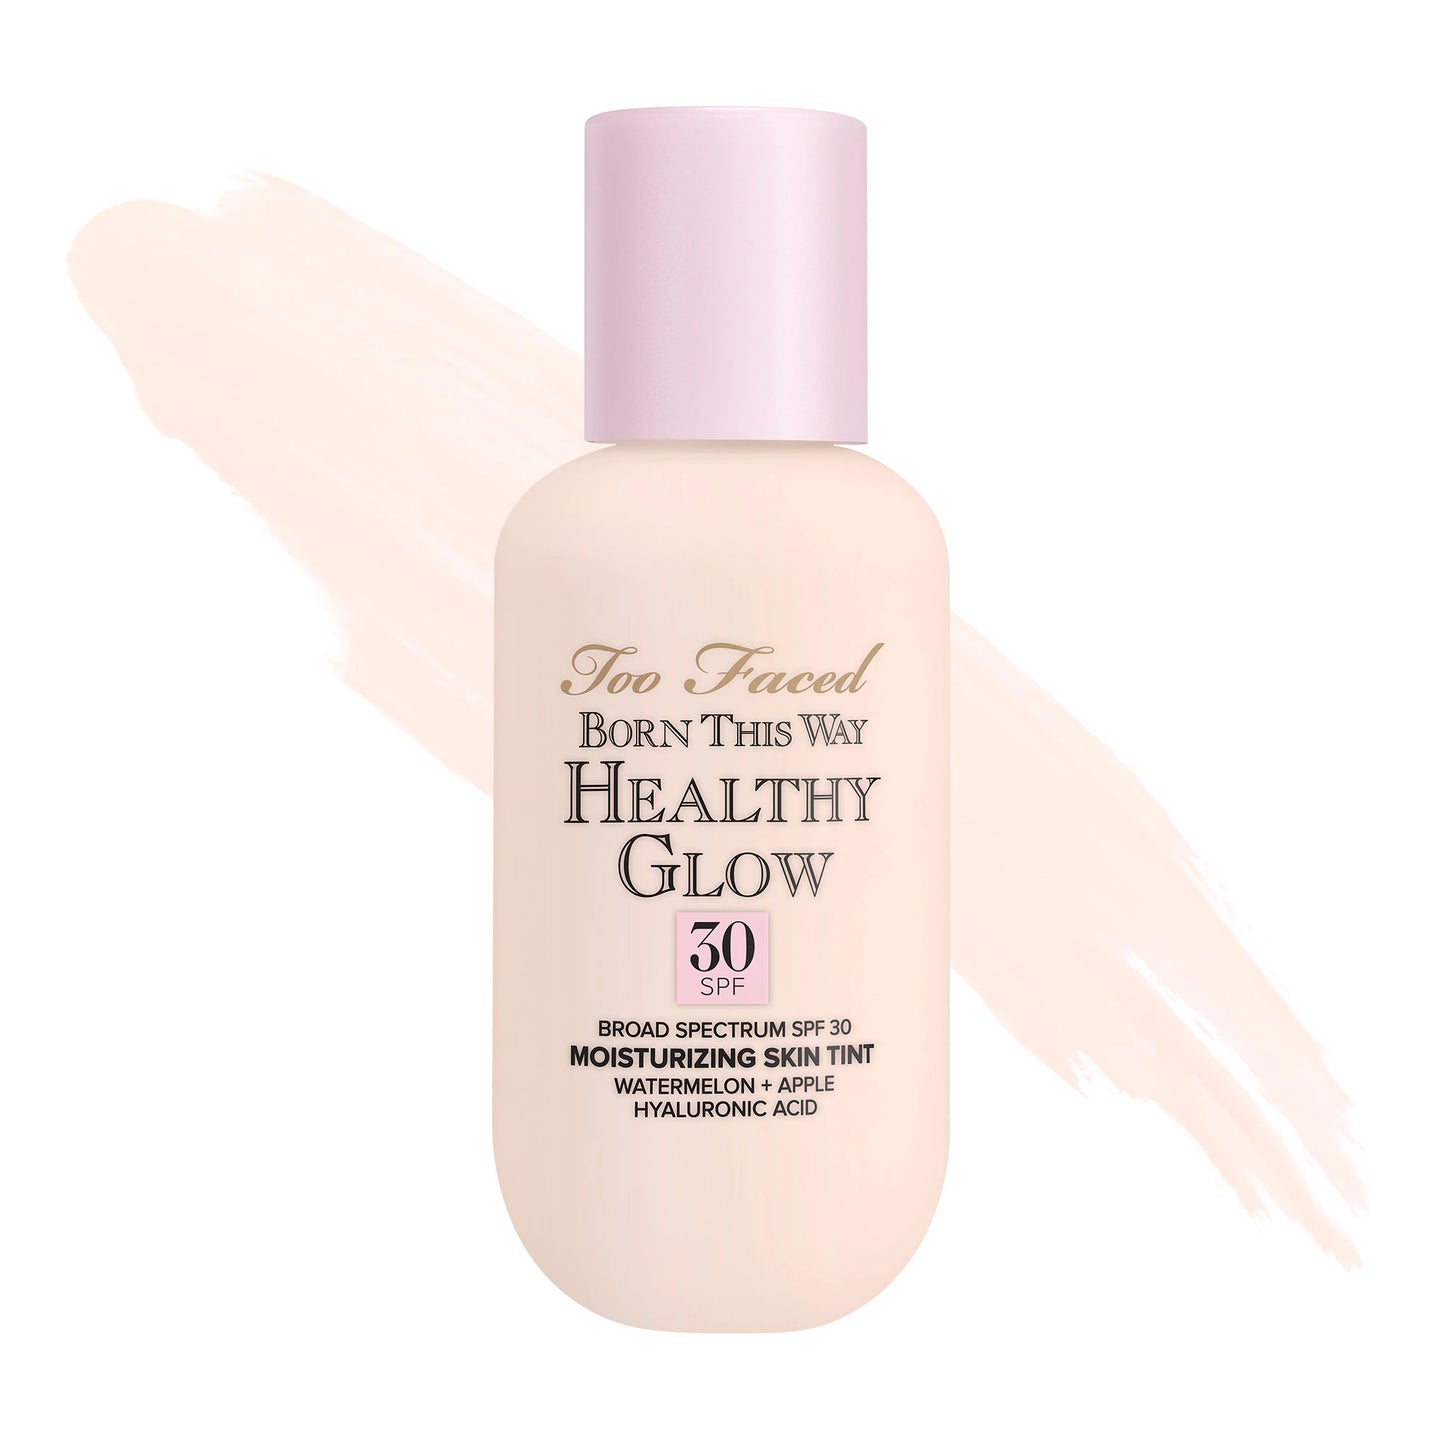 Too Faced Born This Way Healthy Glow SPF 30 Moisturizing Skin Tint